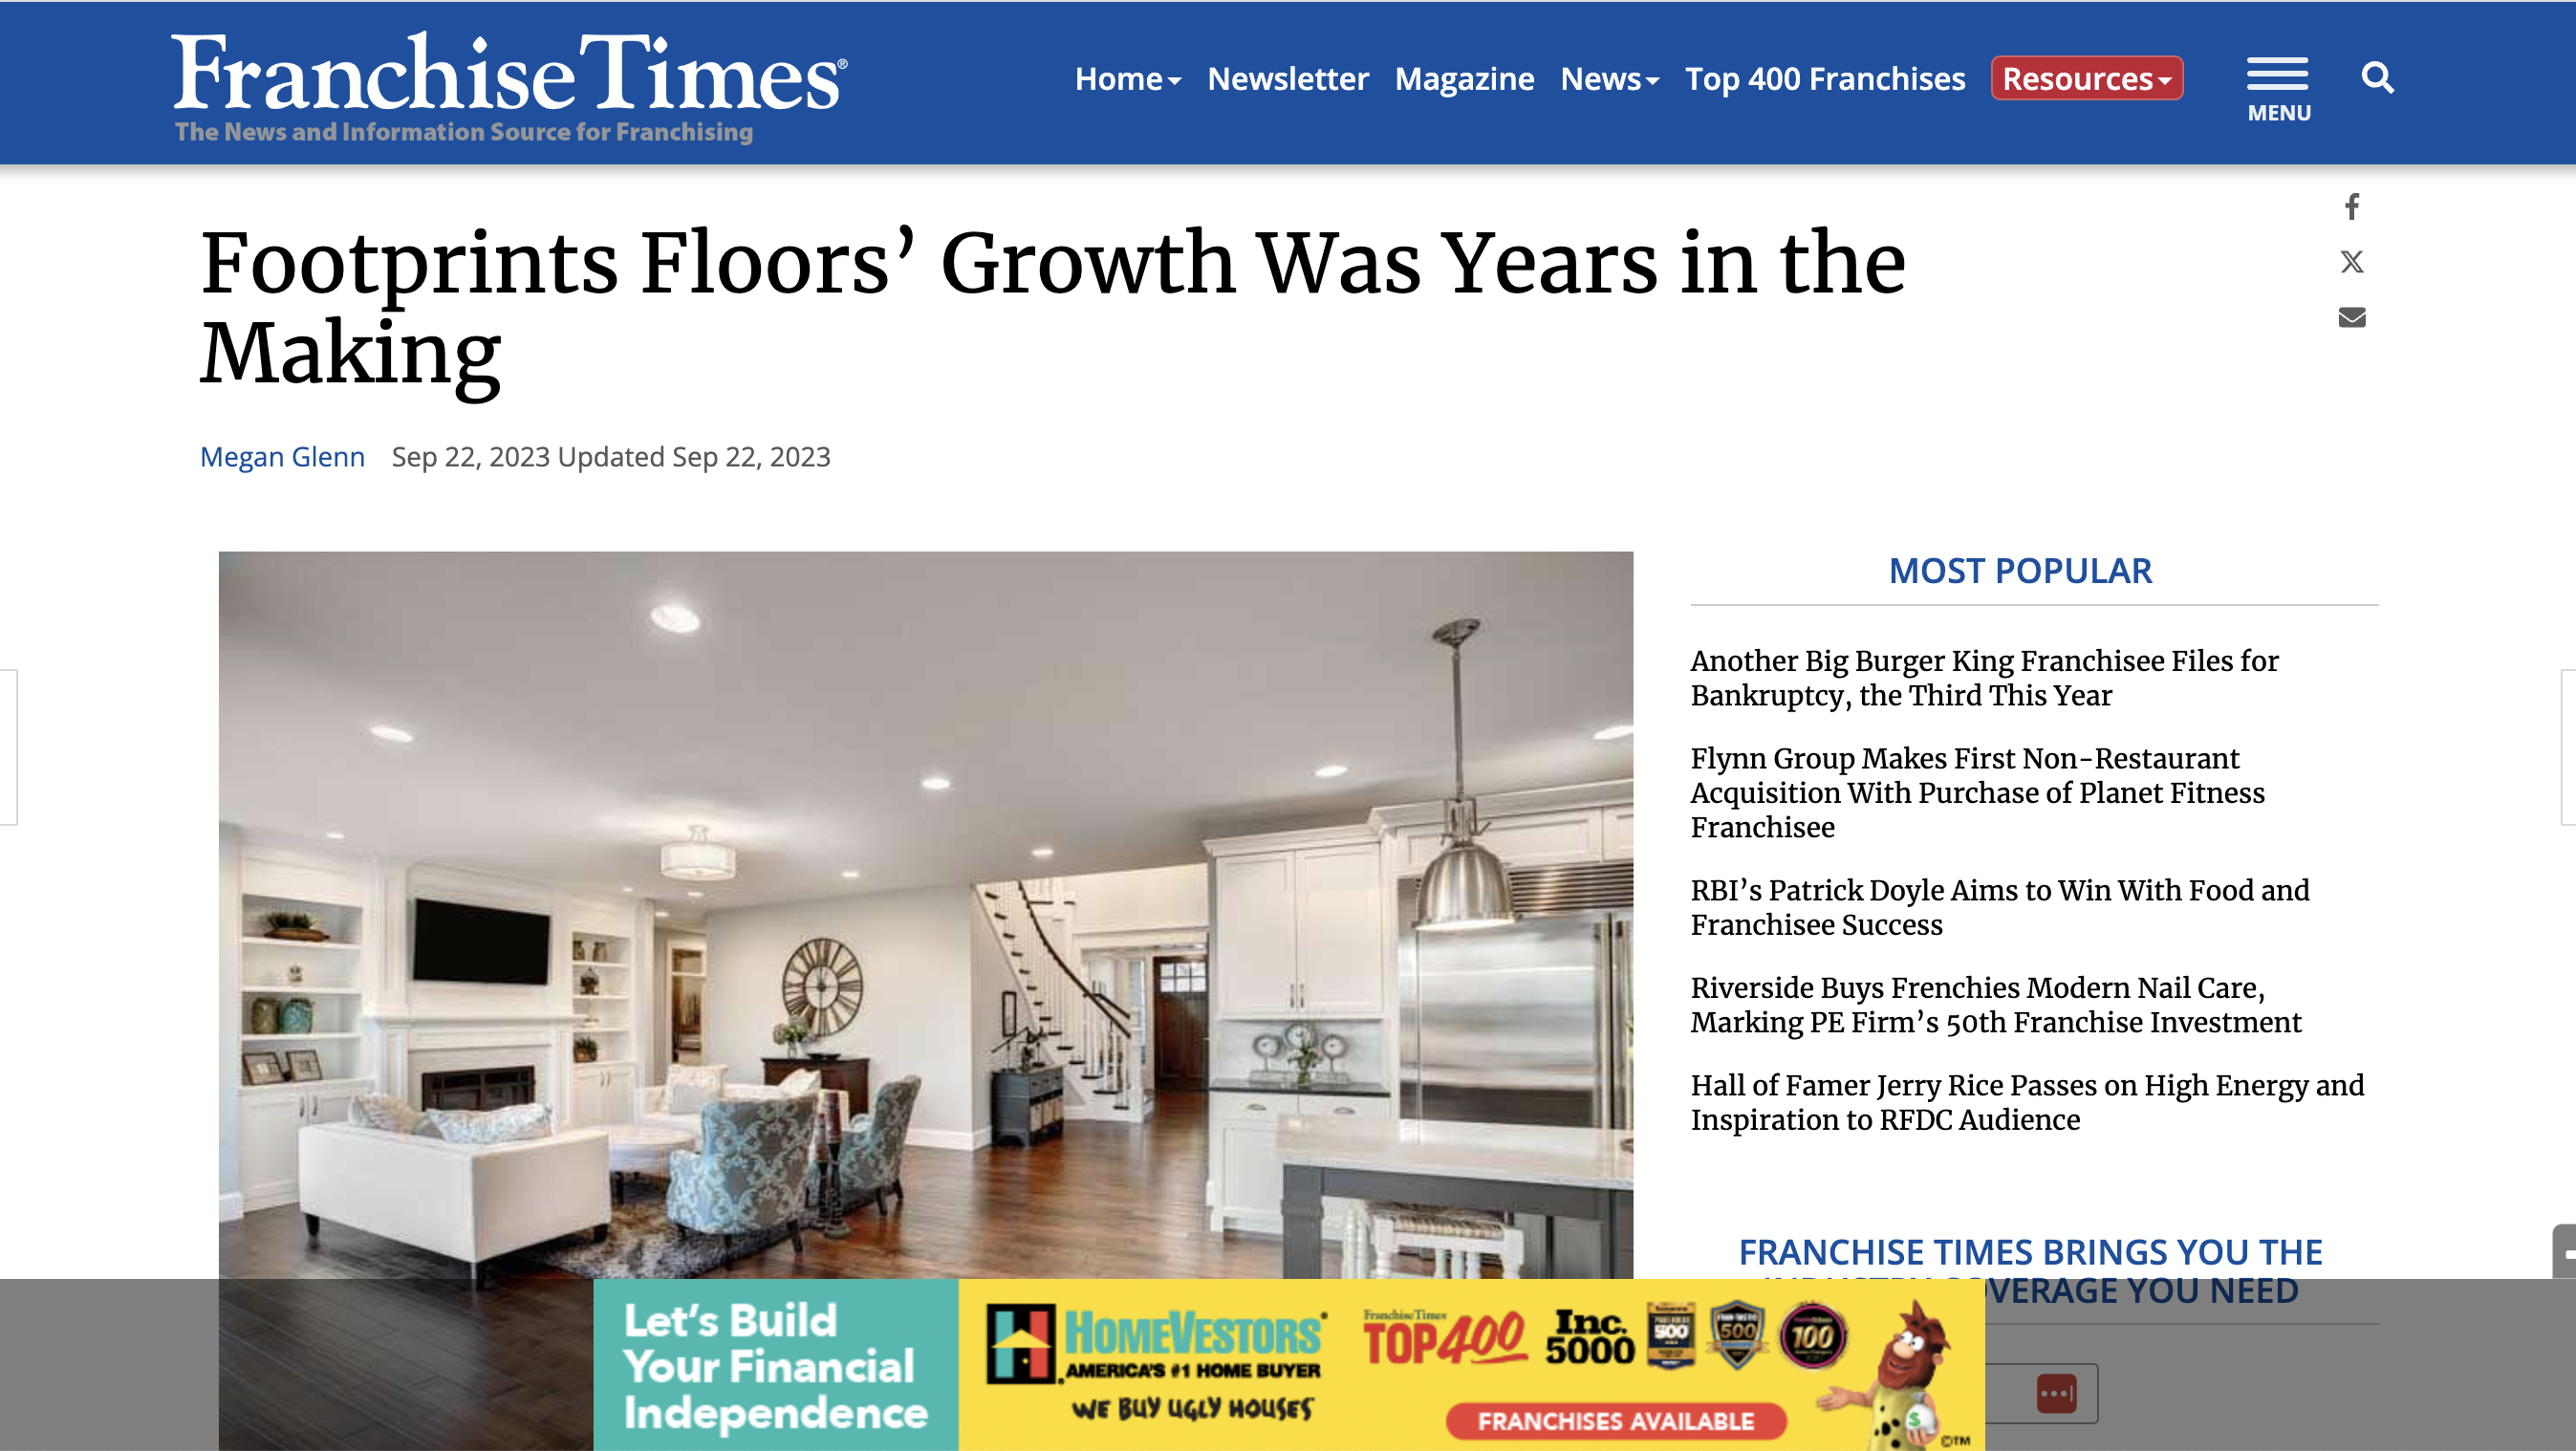 Footprints Floors’ Growth Was Years in the Making